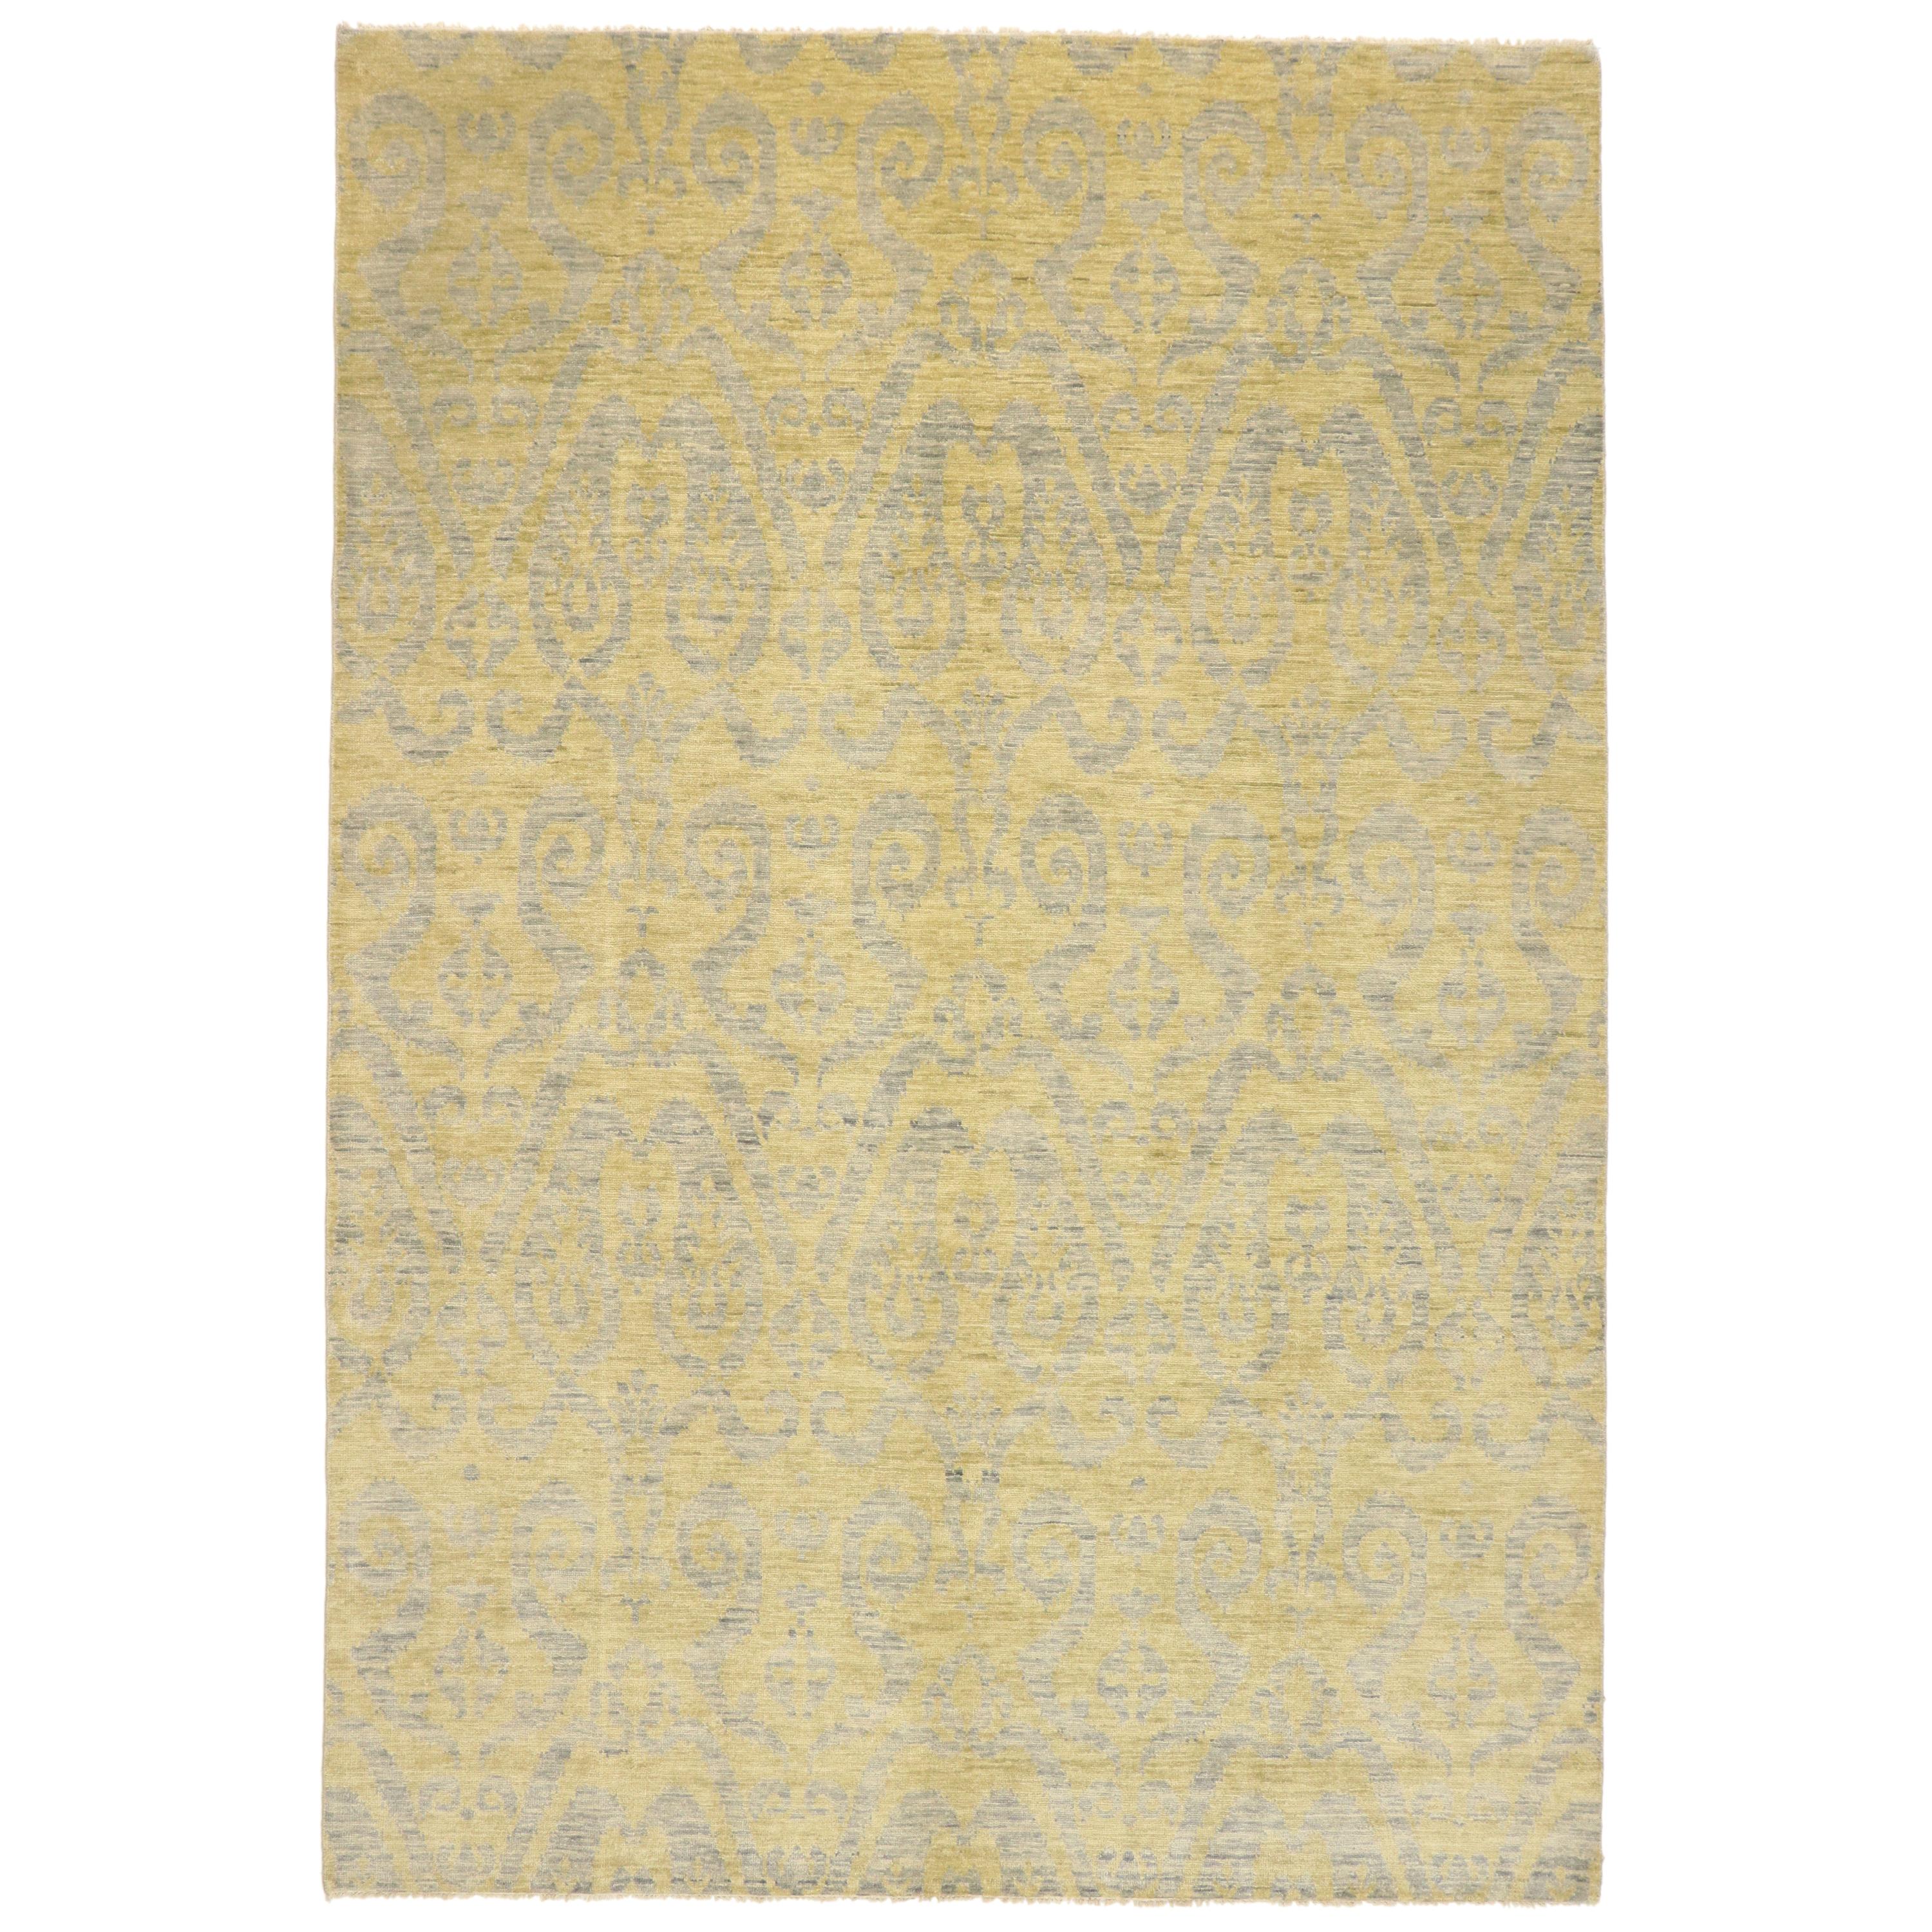 New Transitional Ikat Area Rug with Modern Design, Contemporary Neutral Area Rug